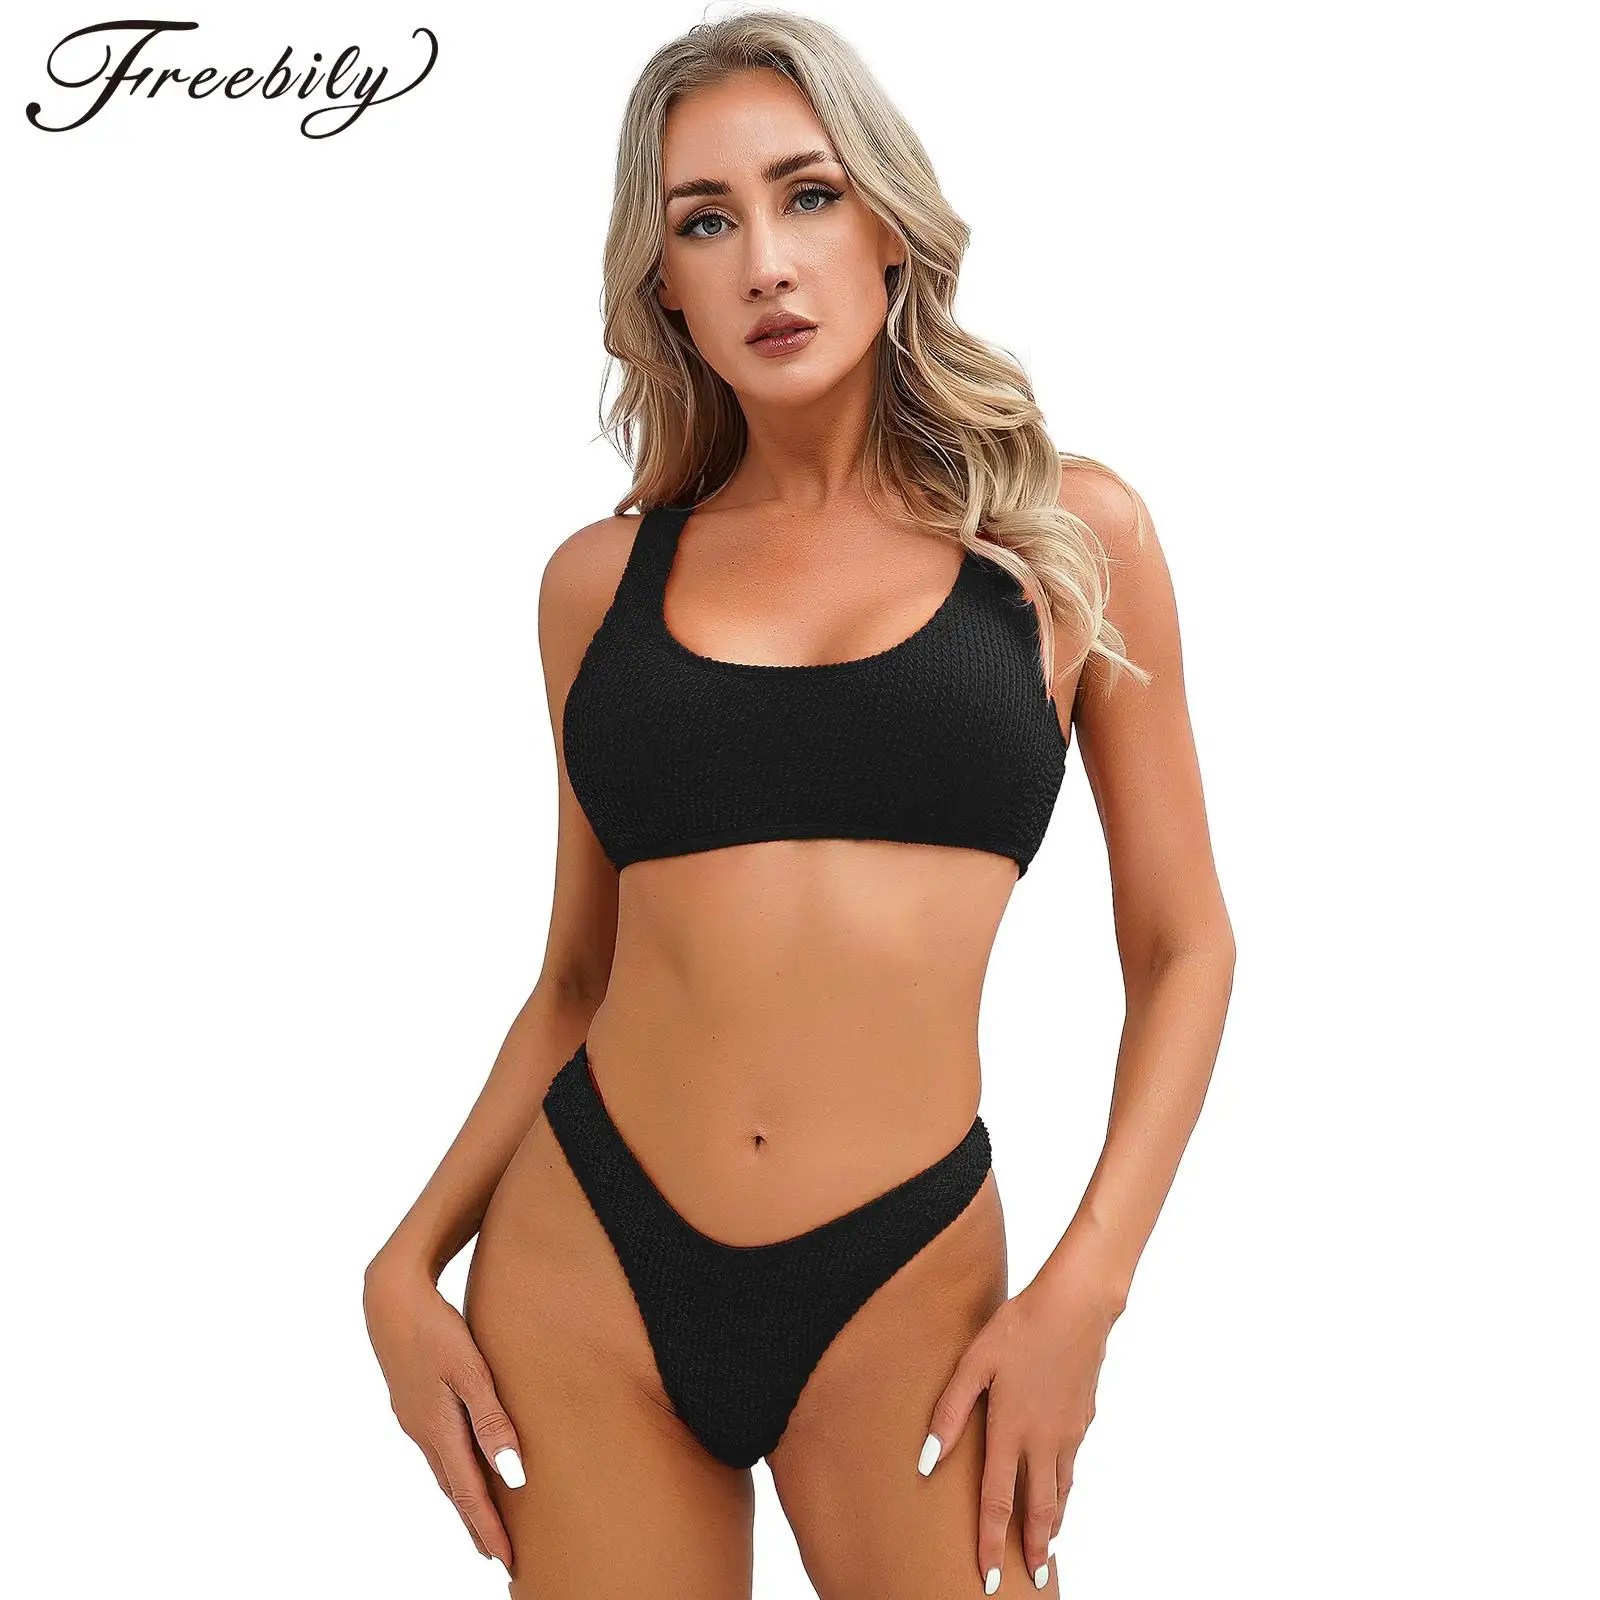 

Womens Two-Piece Beach Bathing Suit Swimsuit Swimwear Stylish Textured U Neck Removable Padded Bra Crop Top with Low Rise Thong